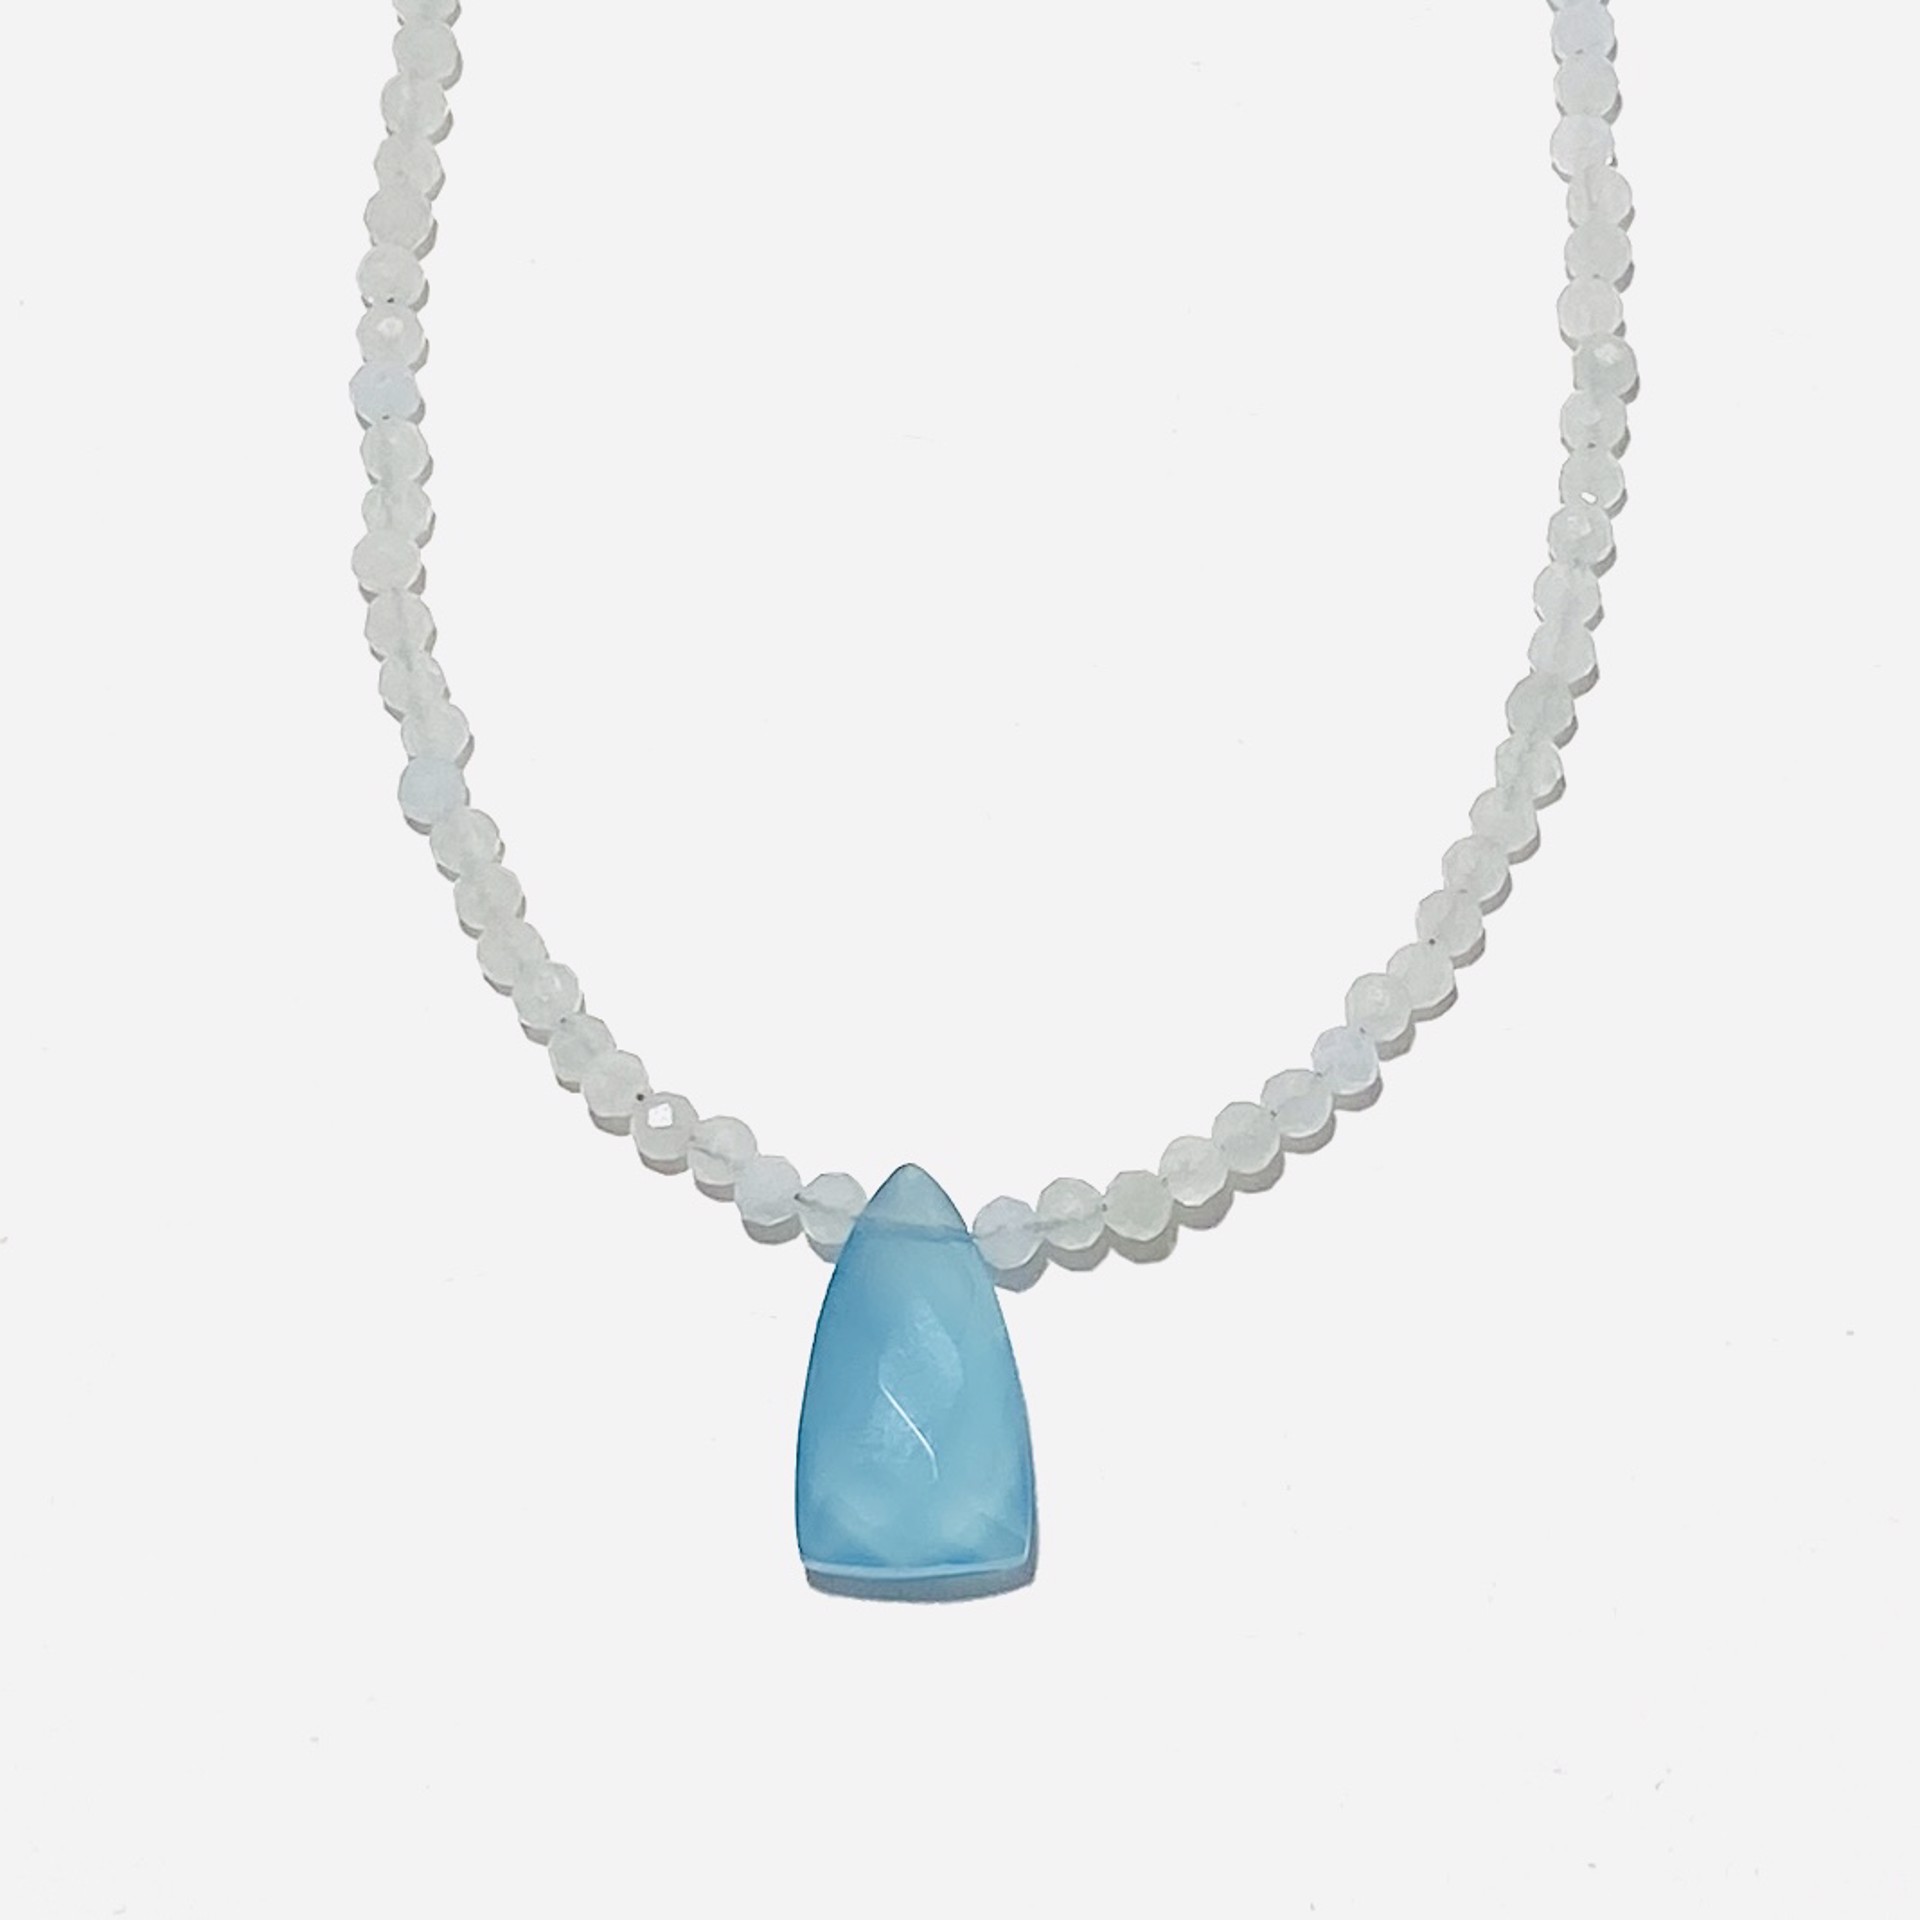 Tiny Faceted Aquamarine Blue Chalcedony Drop Necklace by Nance Trueworthy